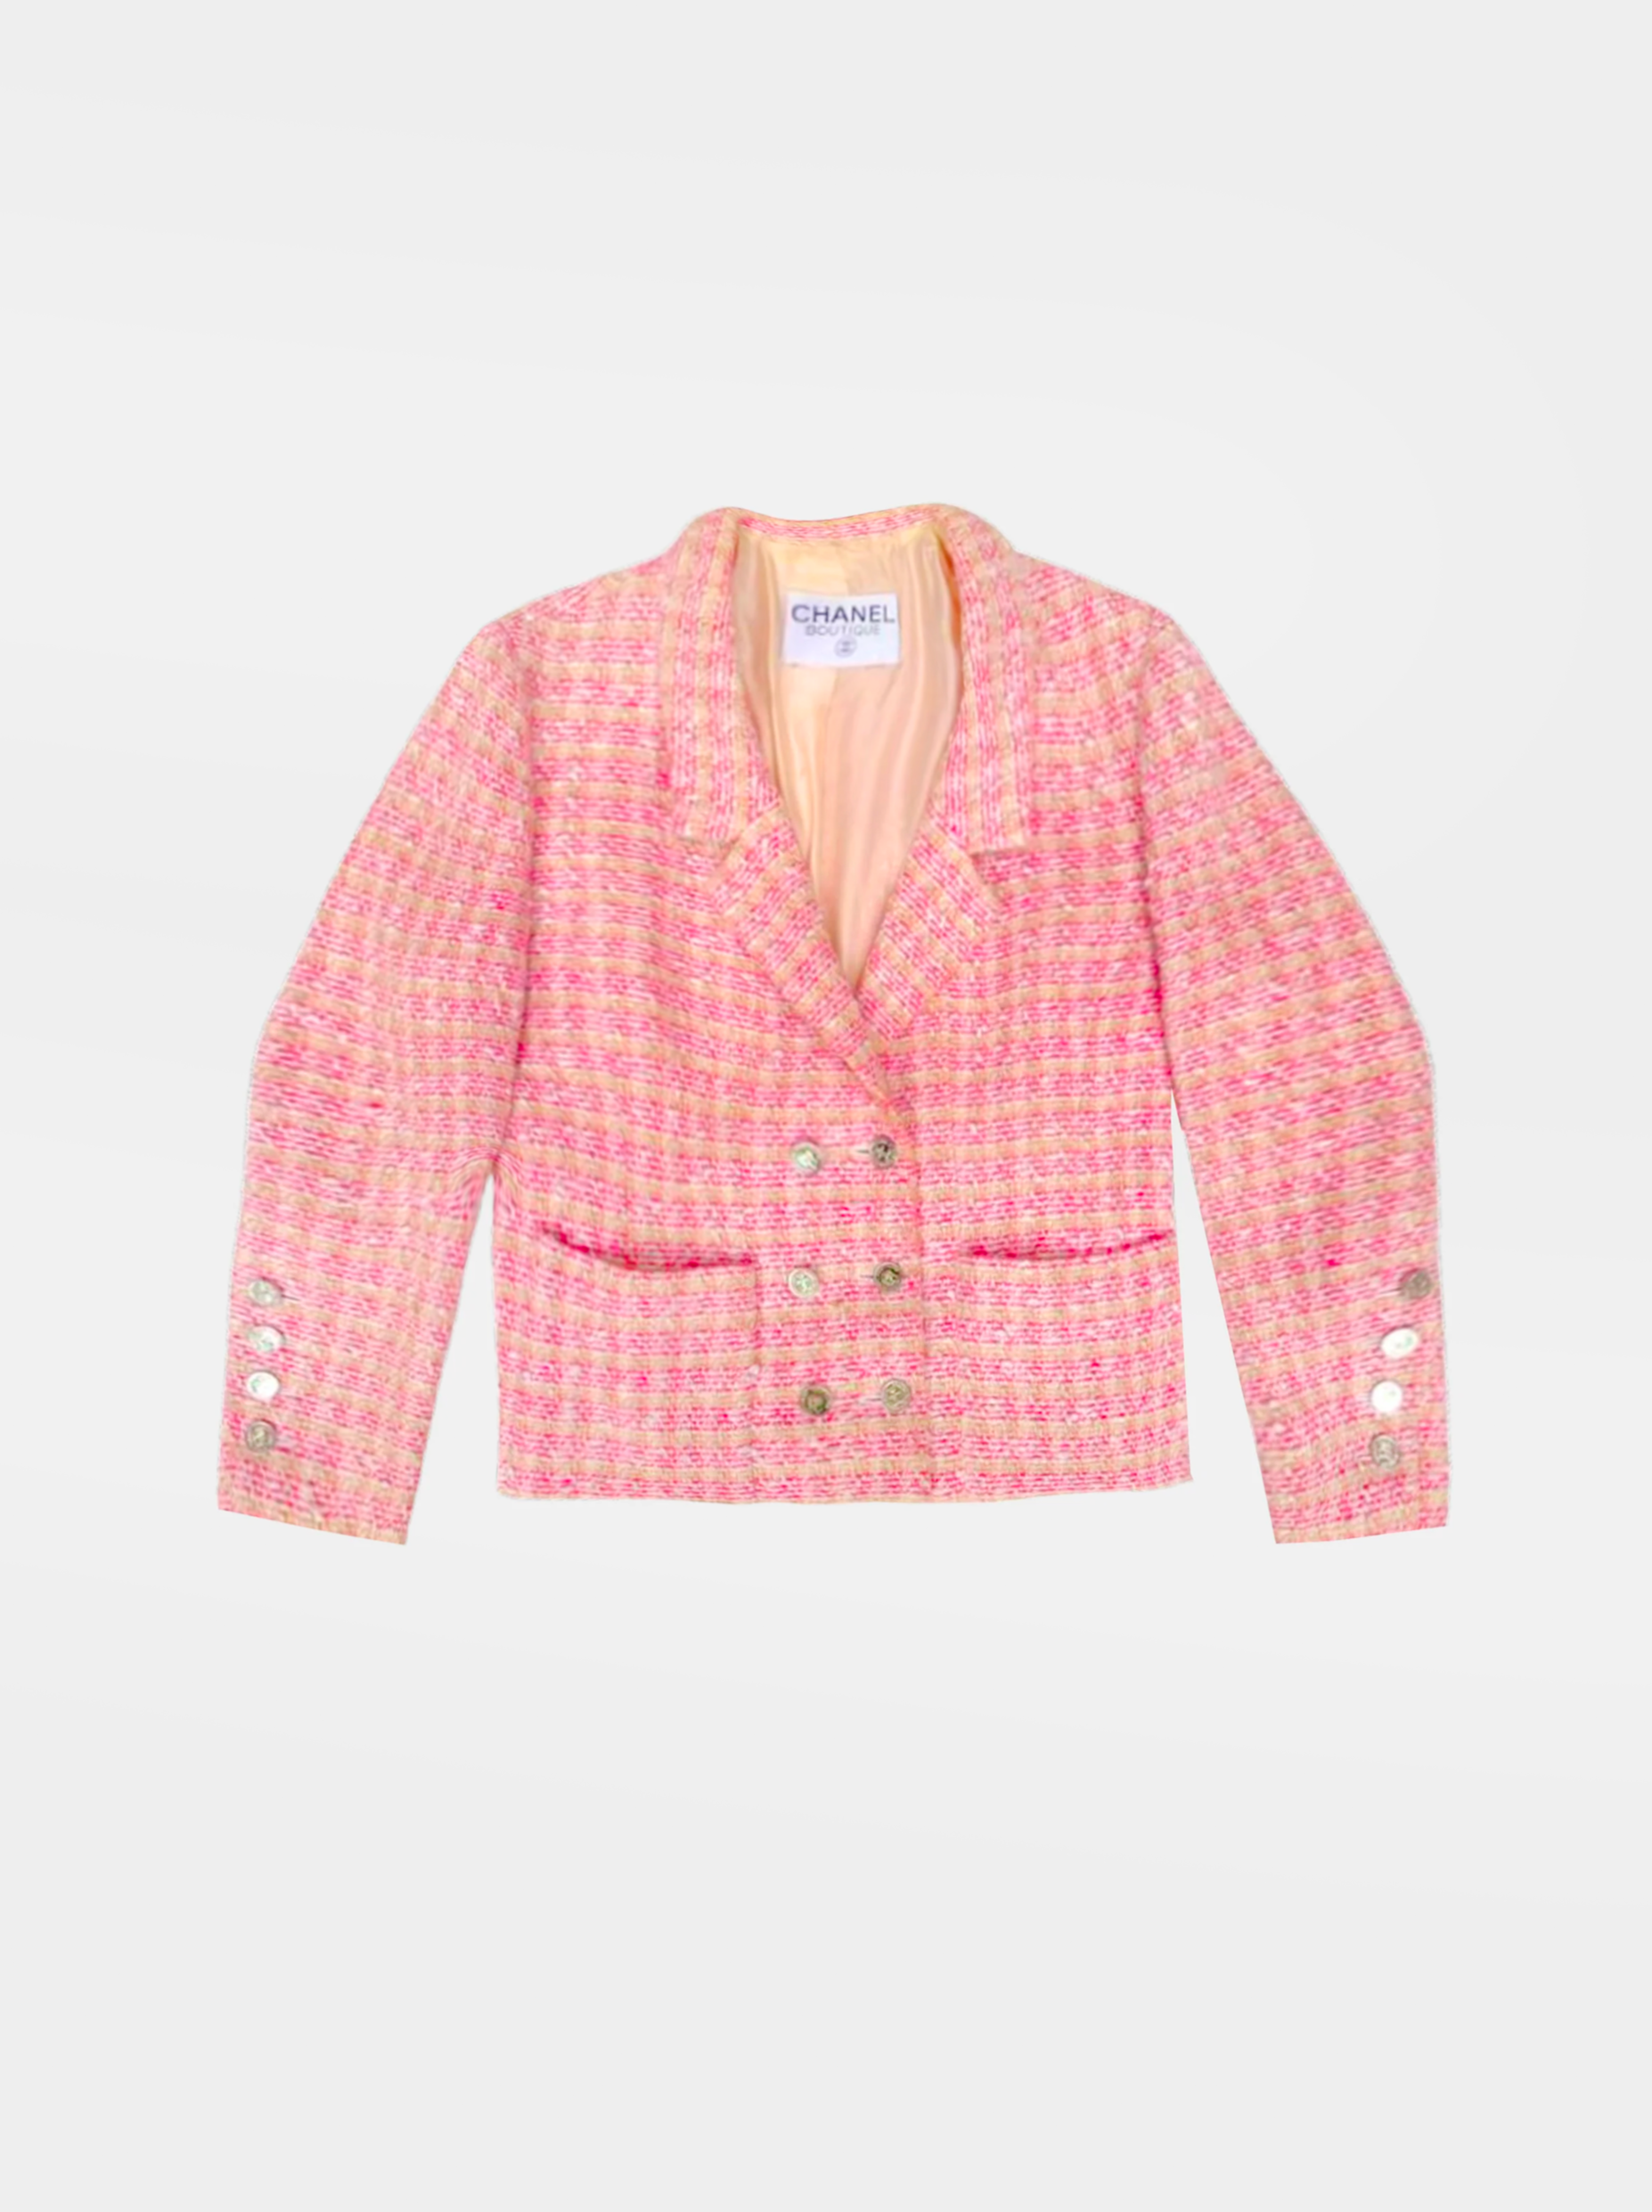 Chanel Double Breasted Jacket With Crest/Patch Details - '80s